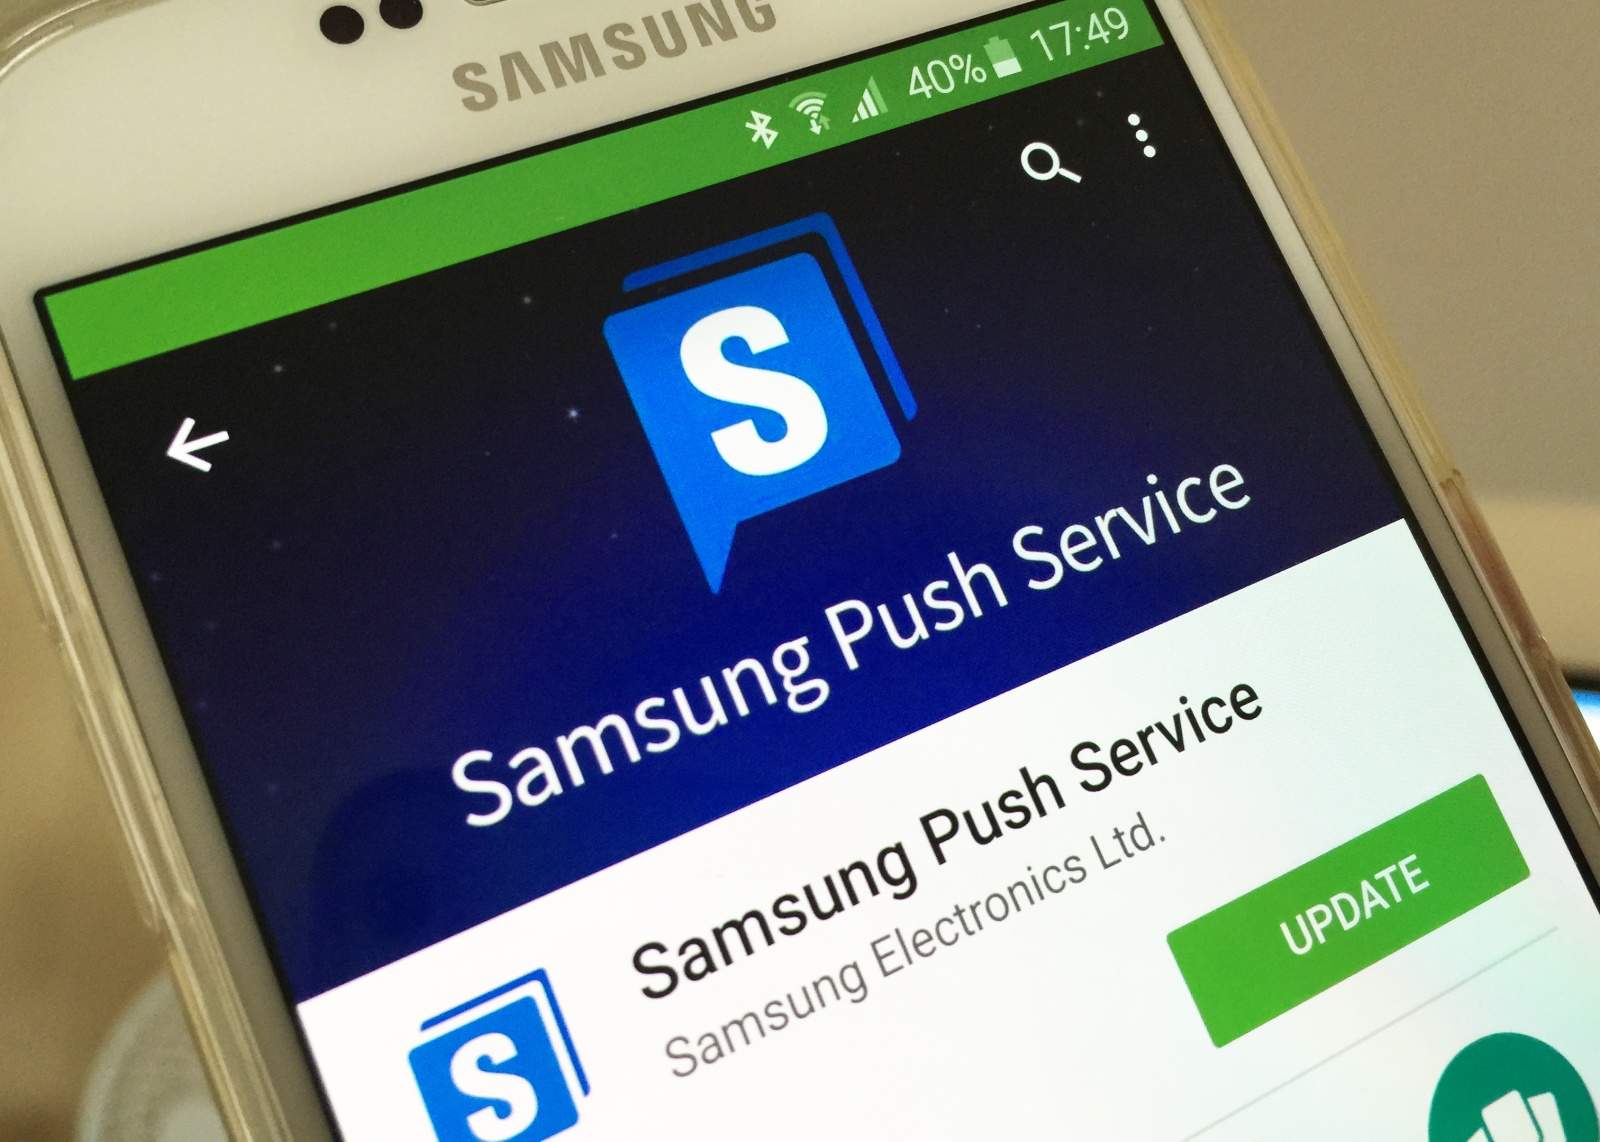 What Is Samsung Push Service And How It Works?